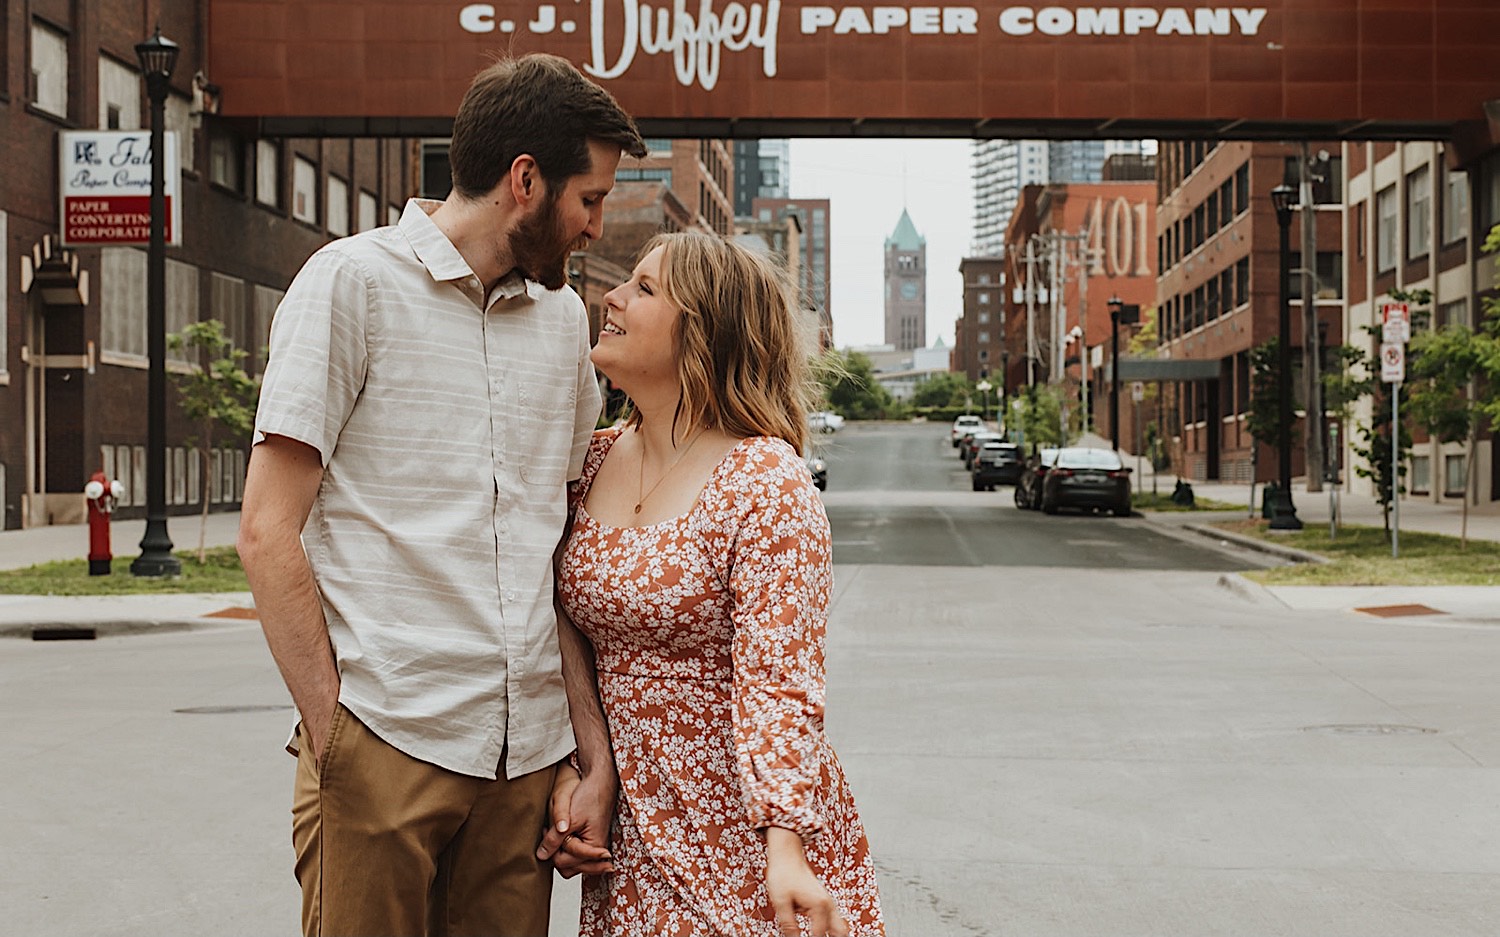 While taking engagement photos in downtown Minneapolis a couple hold hands and smile at one another while in front of the skyway of the Duffey Paper Company